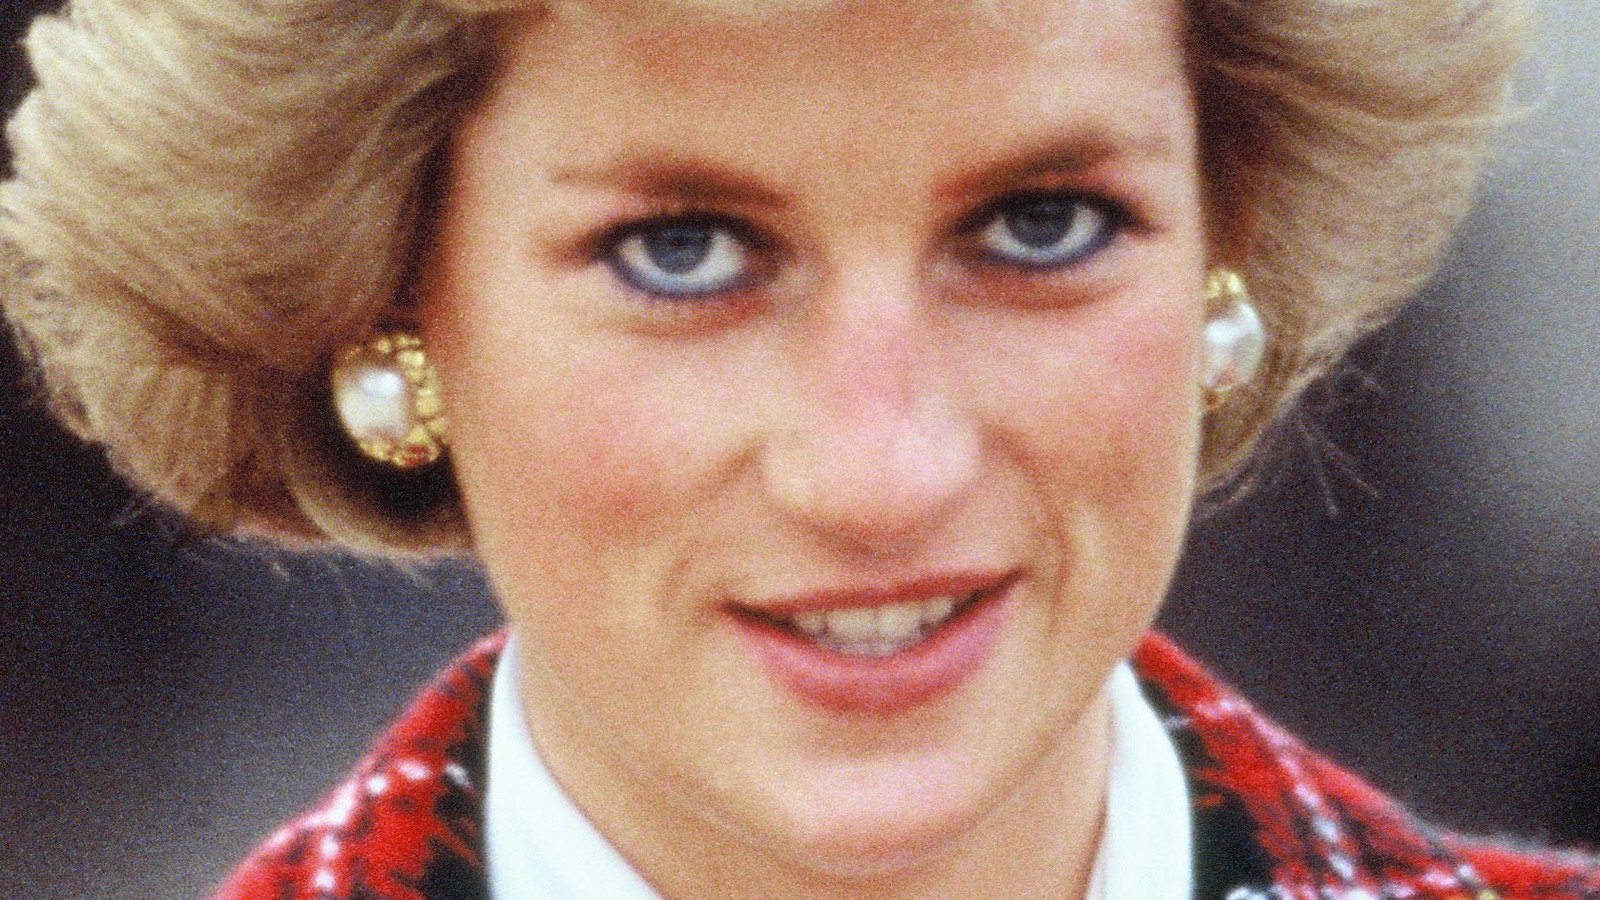 Here's Why Twitter Is Divided On The Princess Diana Statue - Nicki Swift